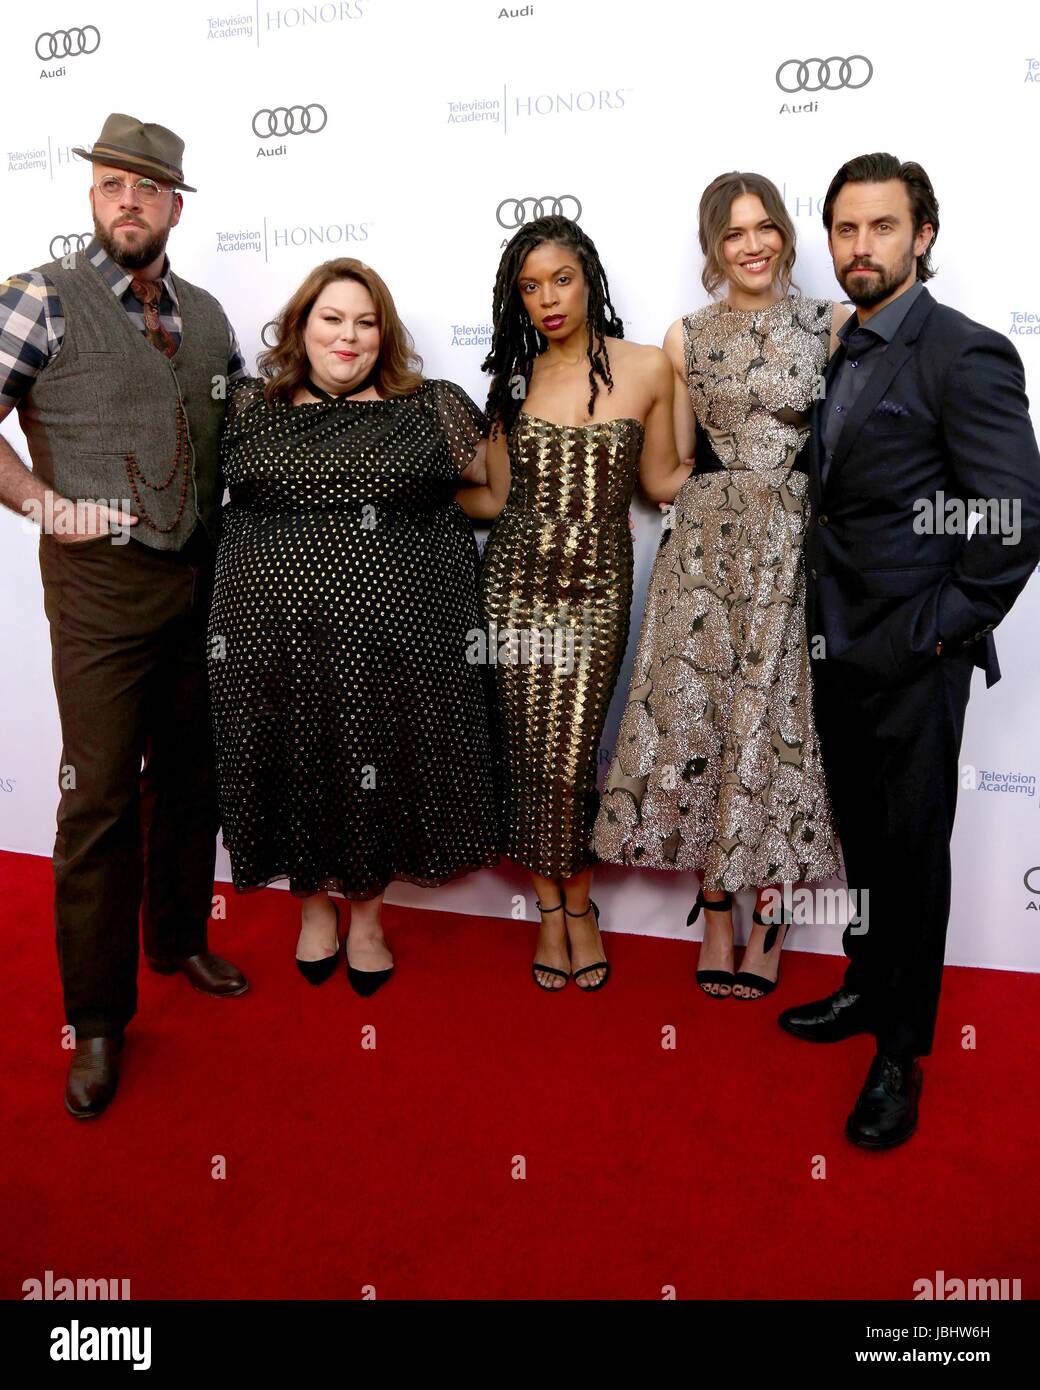 Beverly Hills, CA. 8th June, 2017. Chris Sullivan, Chrissy Metz, Susan Kelechi Watson, Mandy Moore, Milo Ventimiglia at arrivals for 10th Annual Television Academy Honors, Montage Hotel, Beverly Hills, CA June 8, 2017. Credit: Priscilla Grant/Everett Collection/Alamy Live News Stock Photo